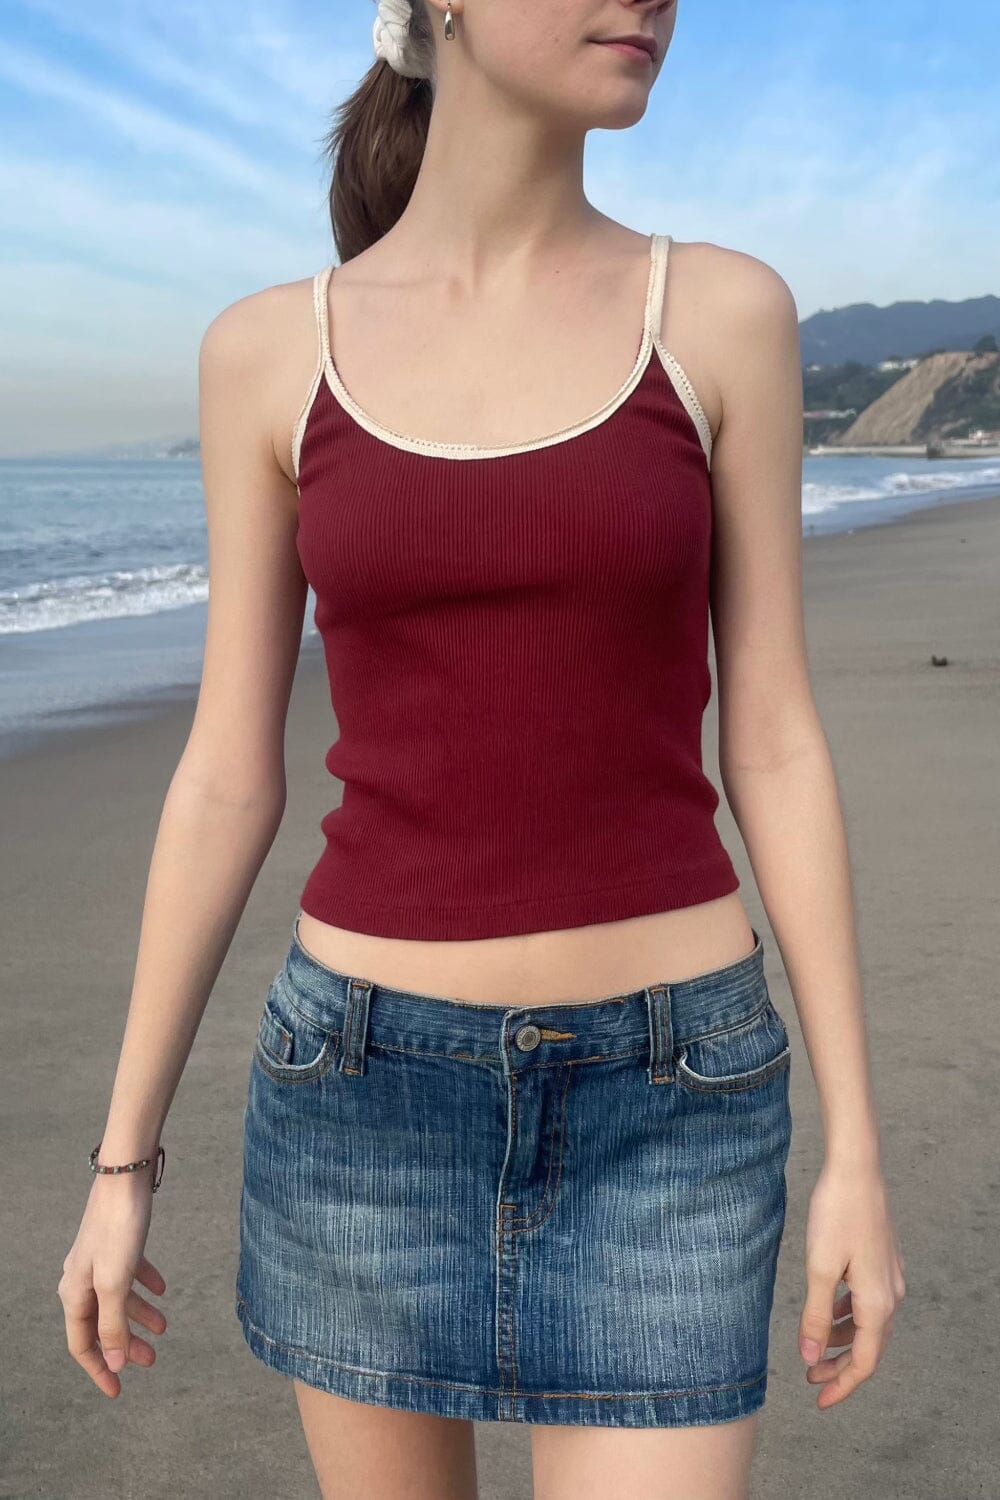 Brandy Melville red tank top, One size but fits like